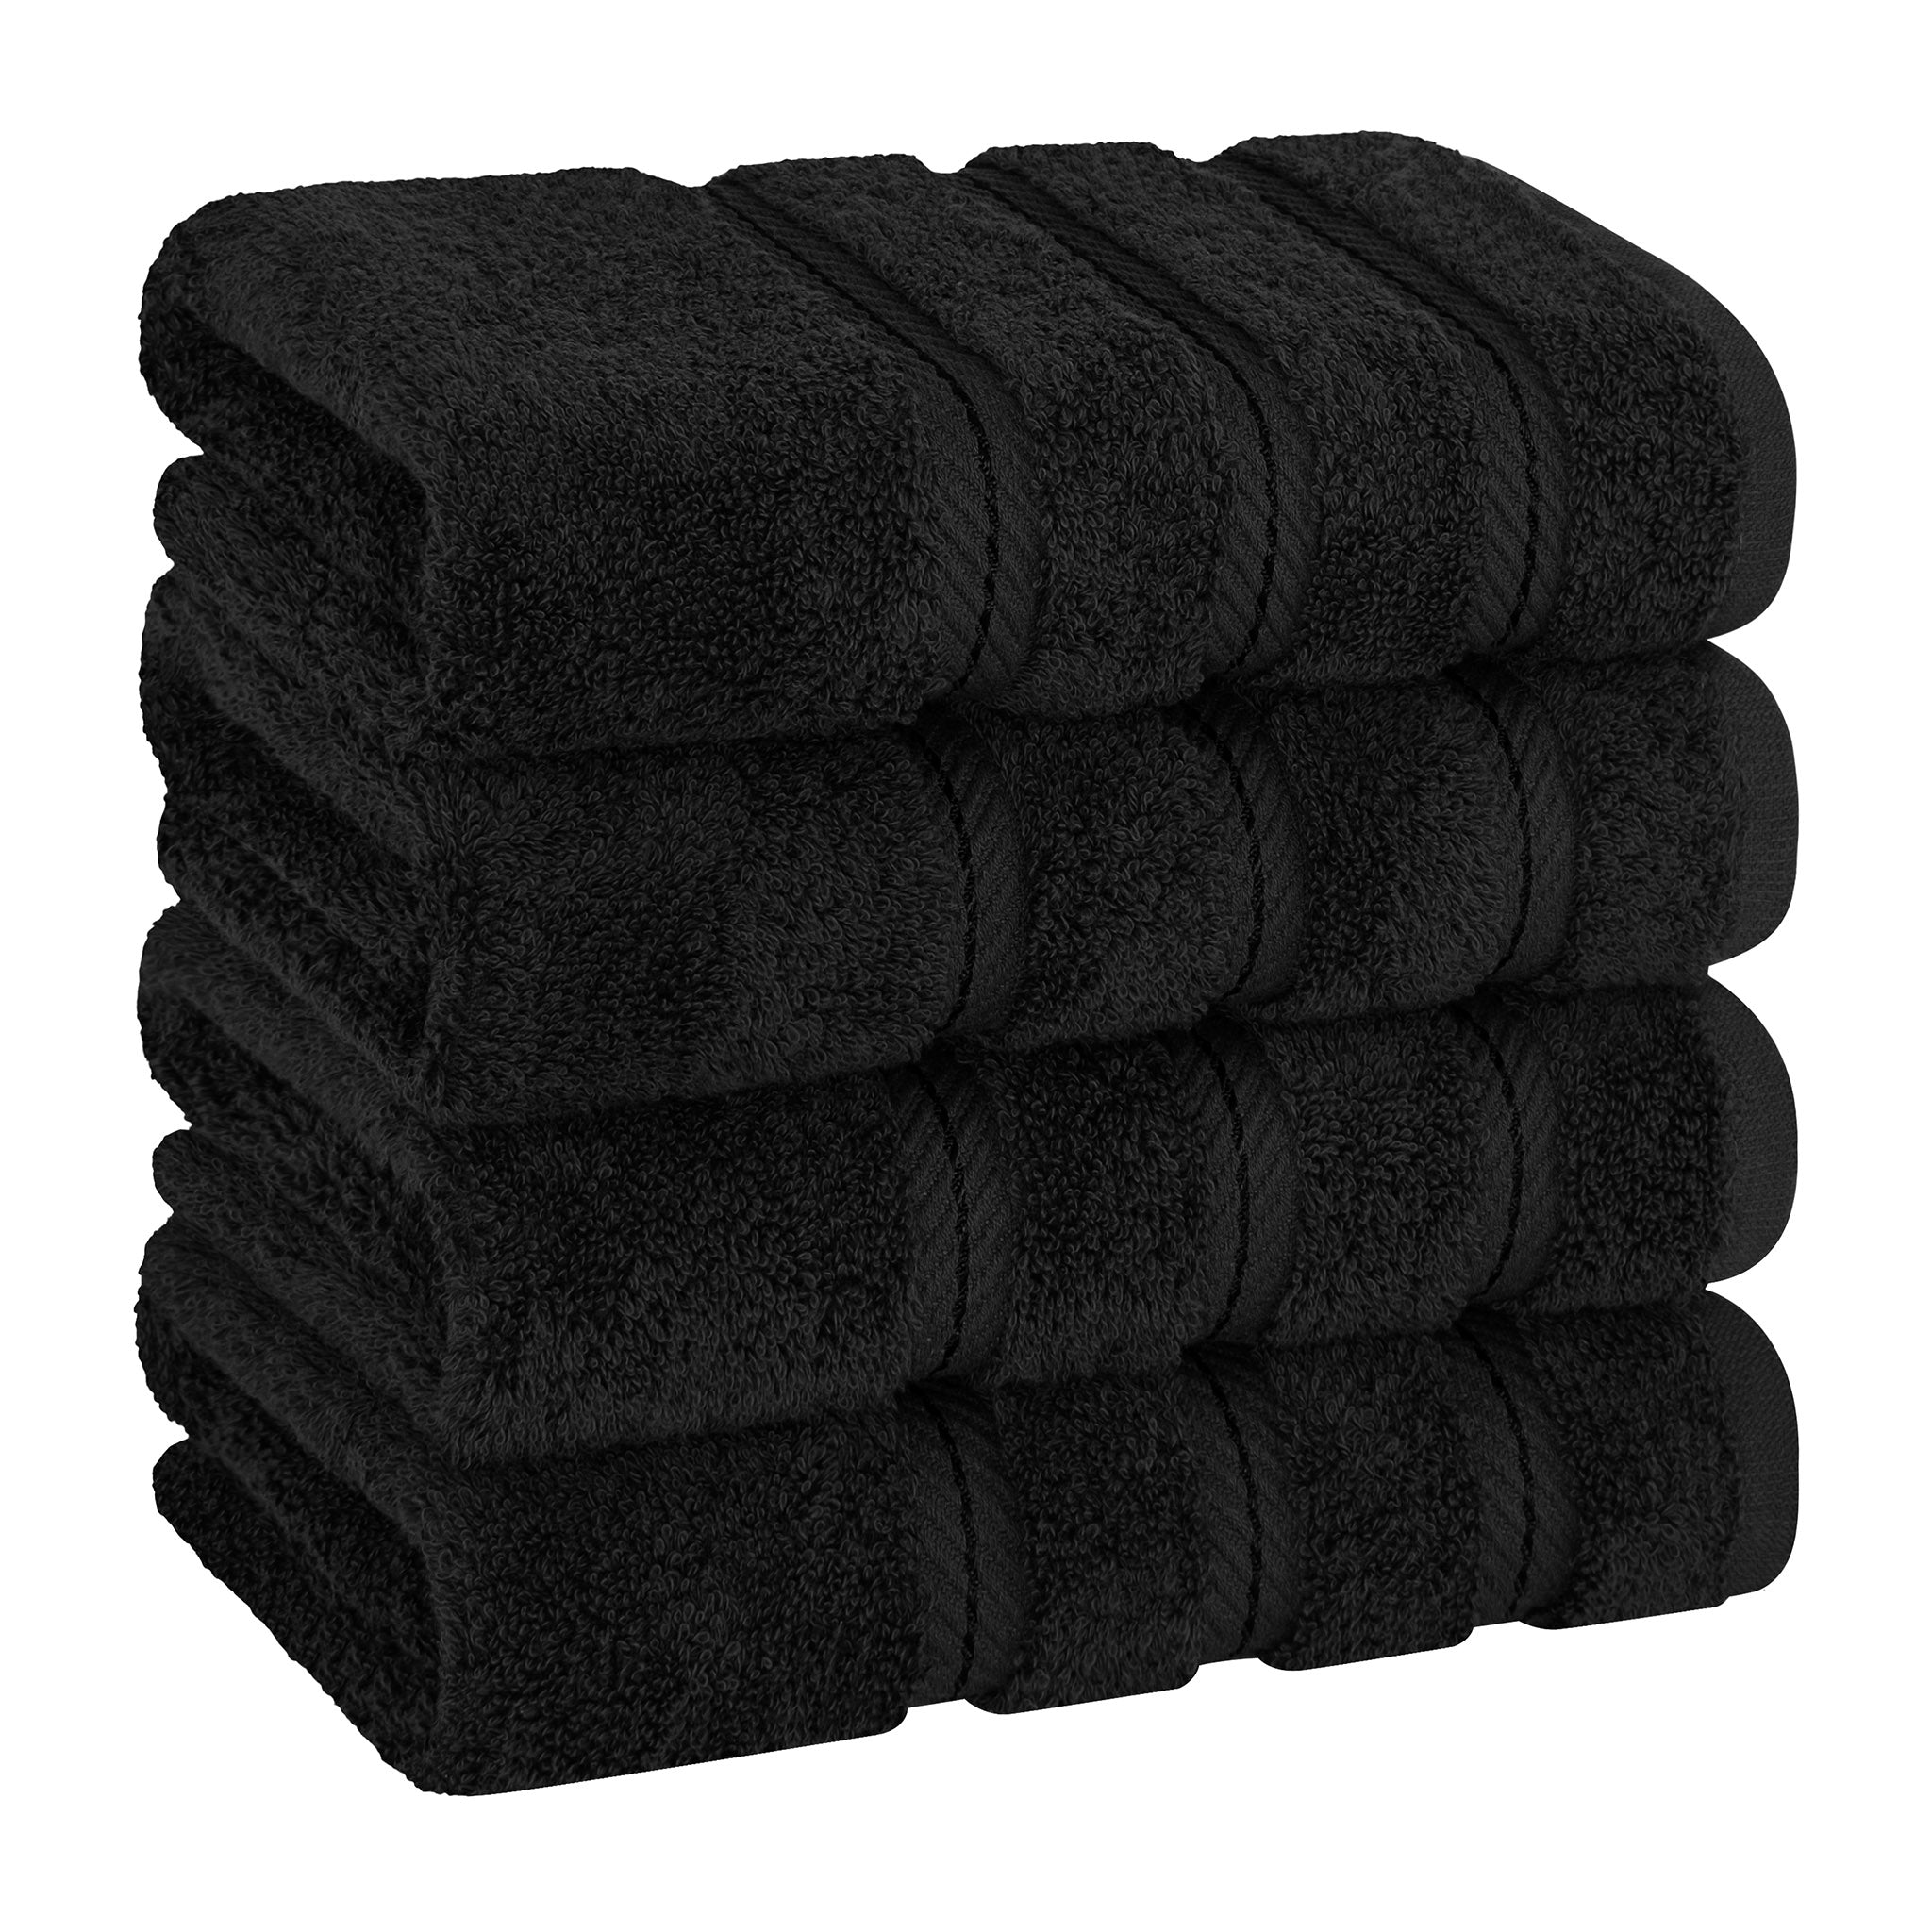 Blutao River Set of 2 Turkish Hand Towels for 18 x 40, Black and